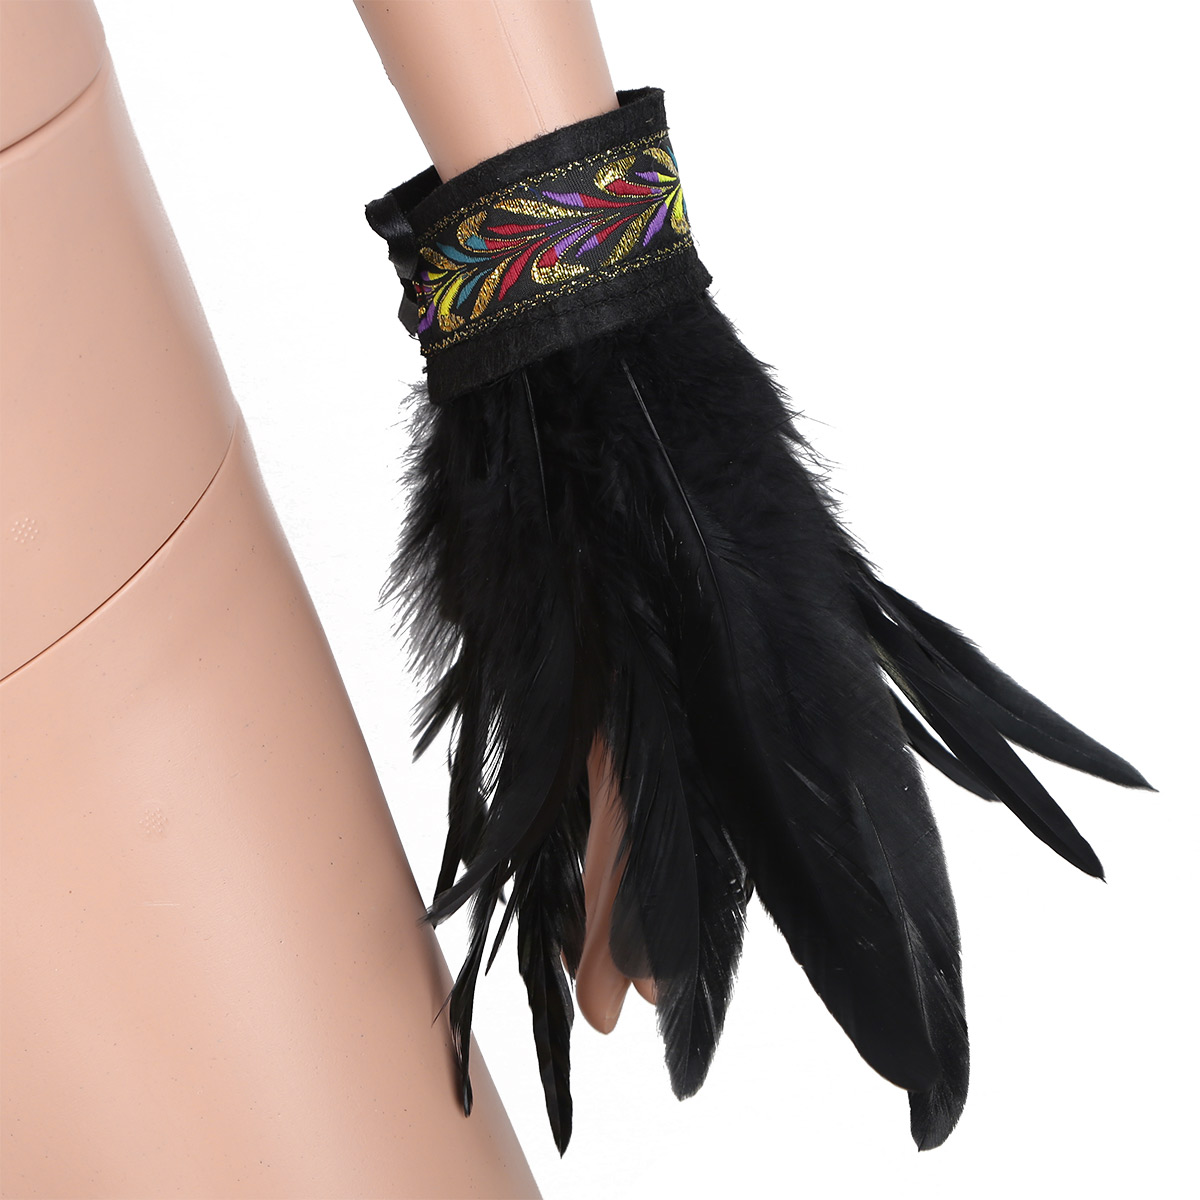 YiZYiF DIY Feather Wrist Cuffs Black Real Natural Dyed Rooster Feather Wrist Cuffs with Ribbon Ties for Game Party Halloween